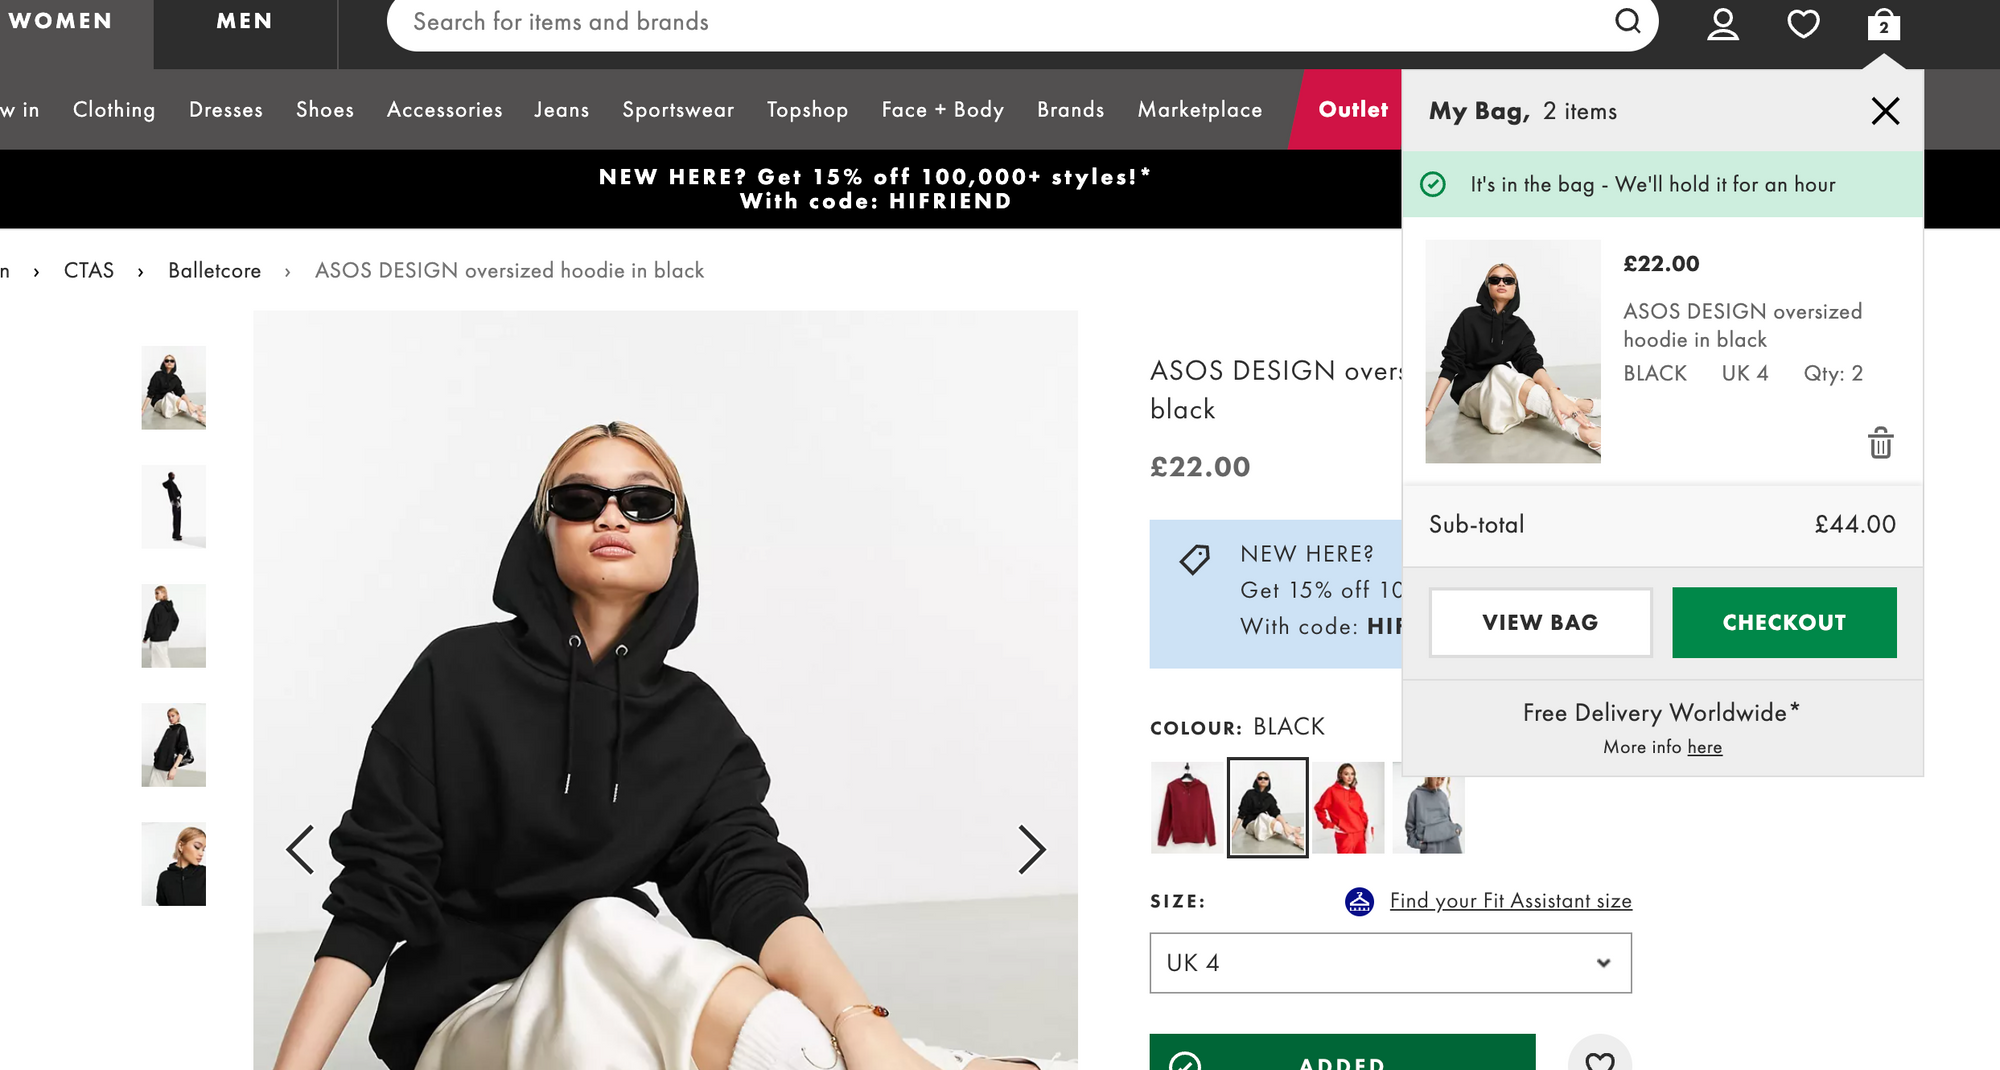 ASOS uses cart timeout to generate urgency and get customers to checkout fast